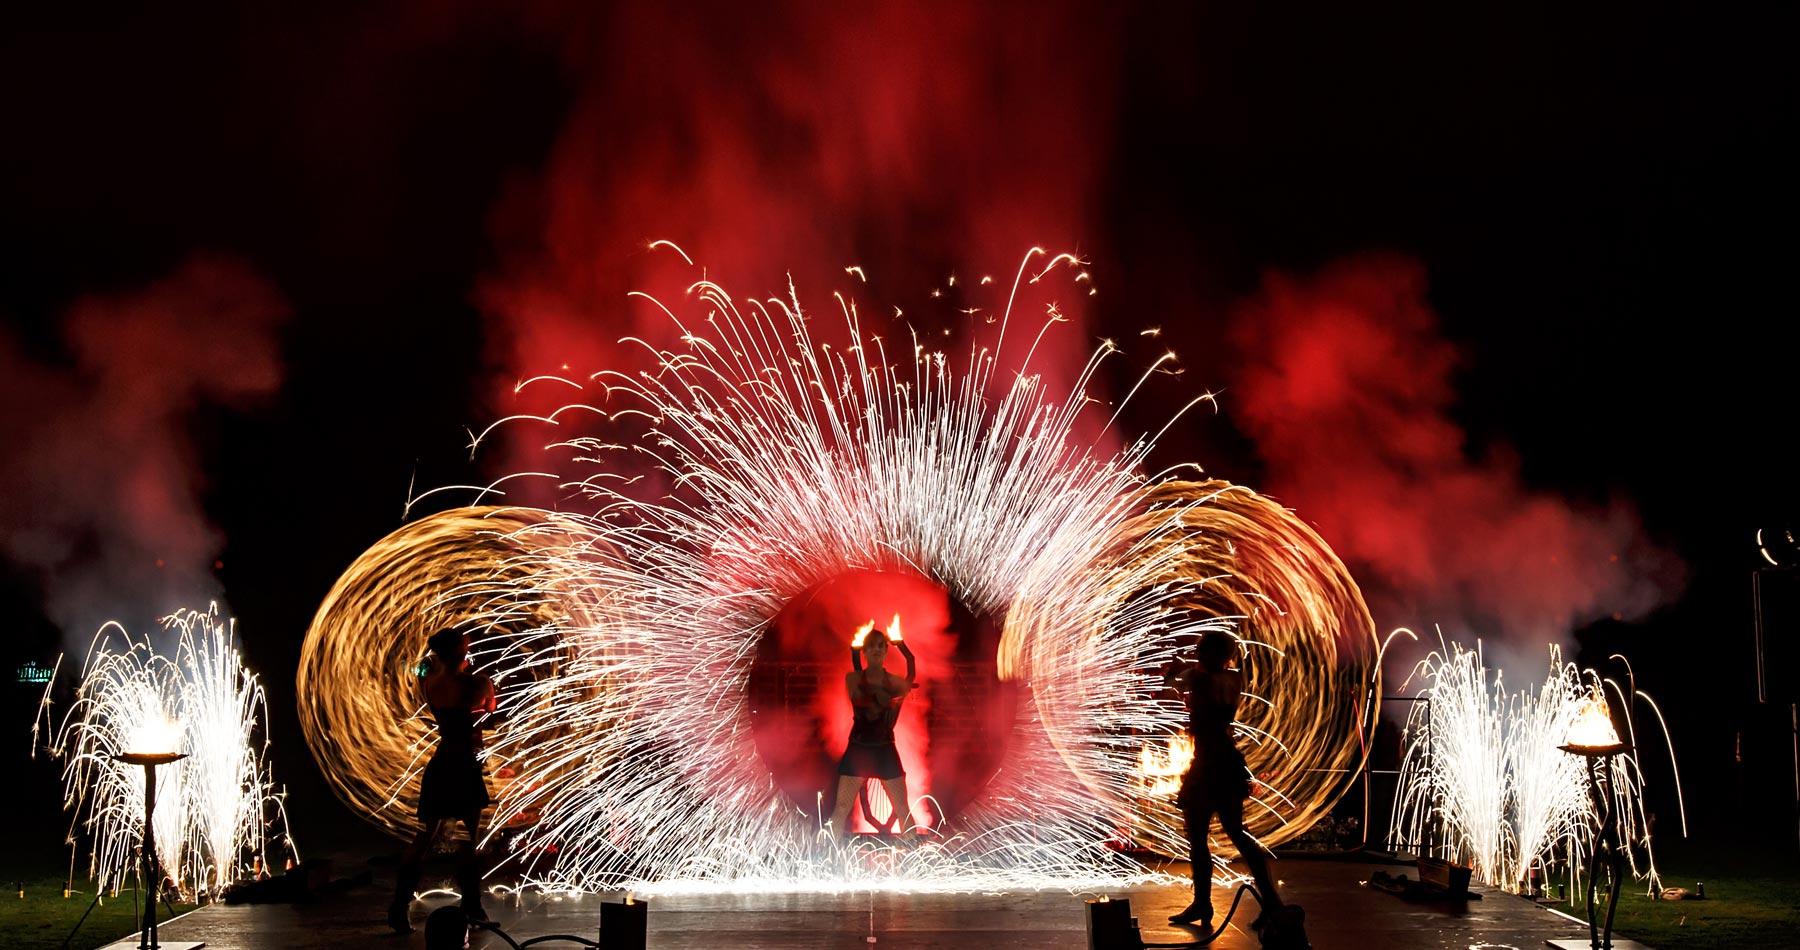 Fire show with fire works